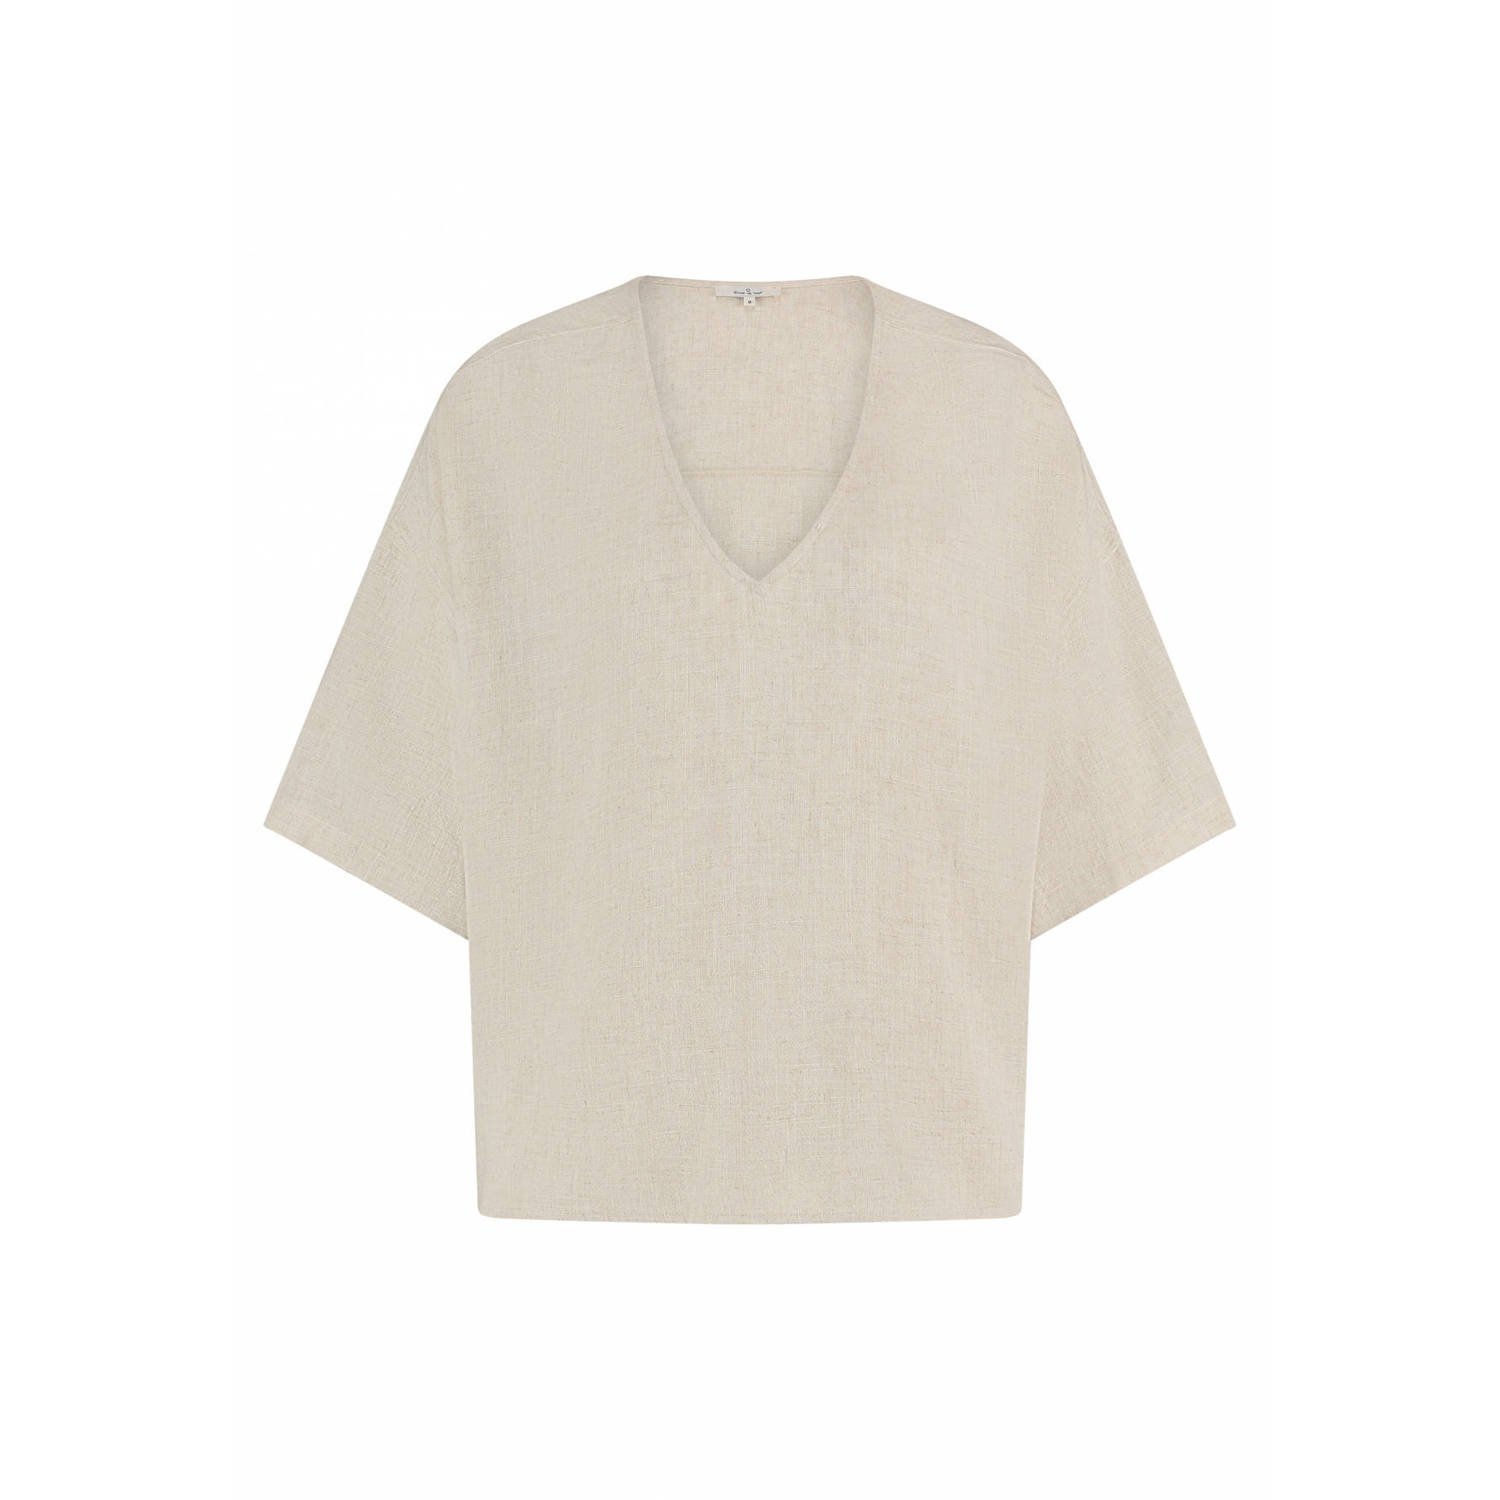 CIRCLE OF TRUST Dames Tops & T-shirts Parker Top Zand